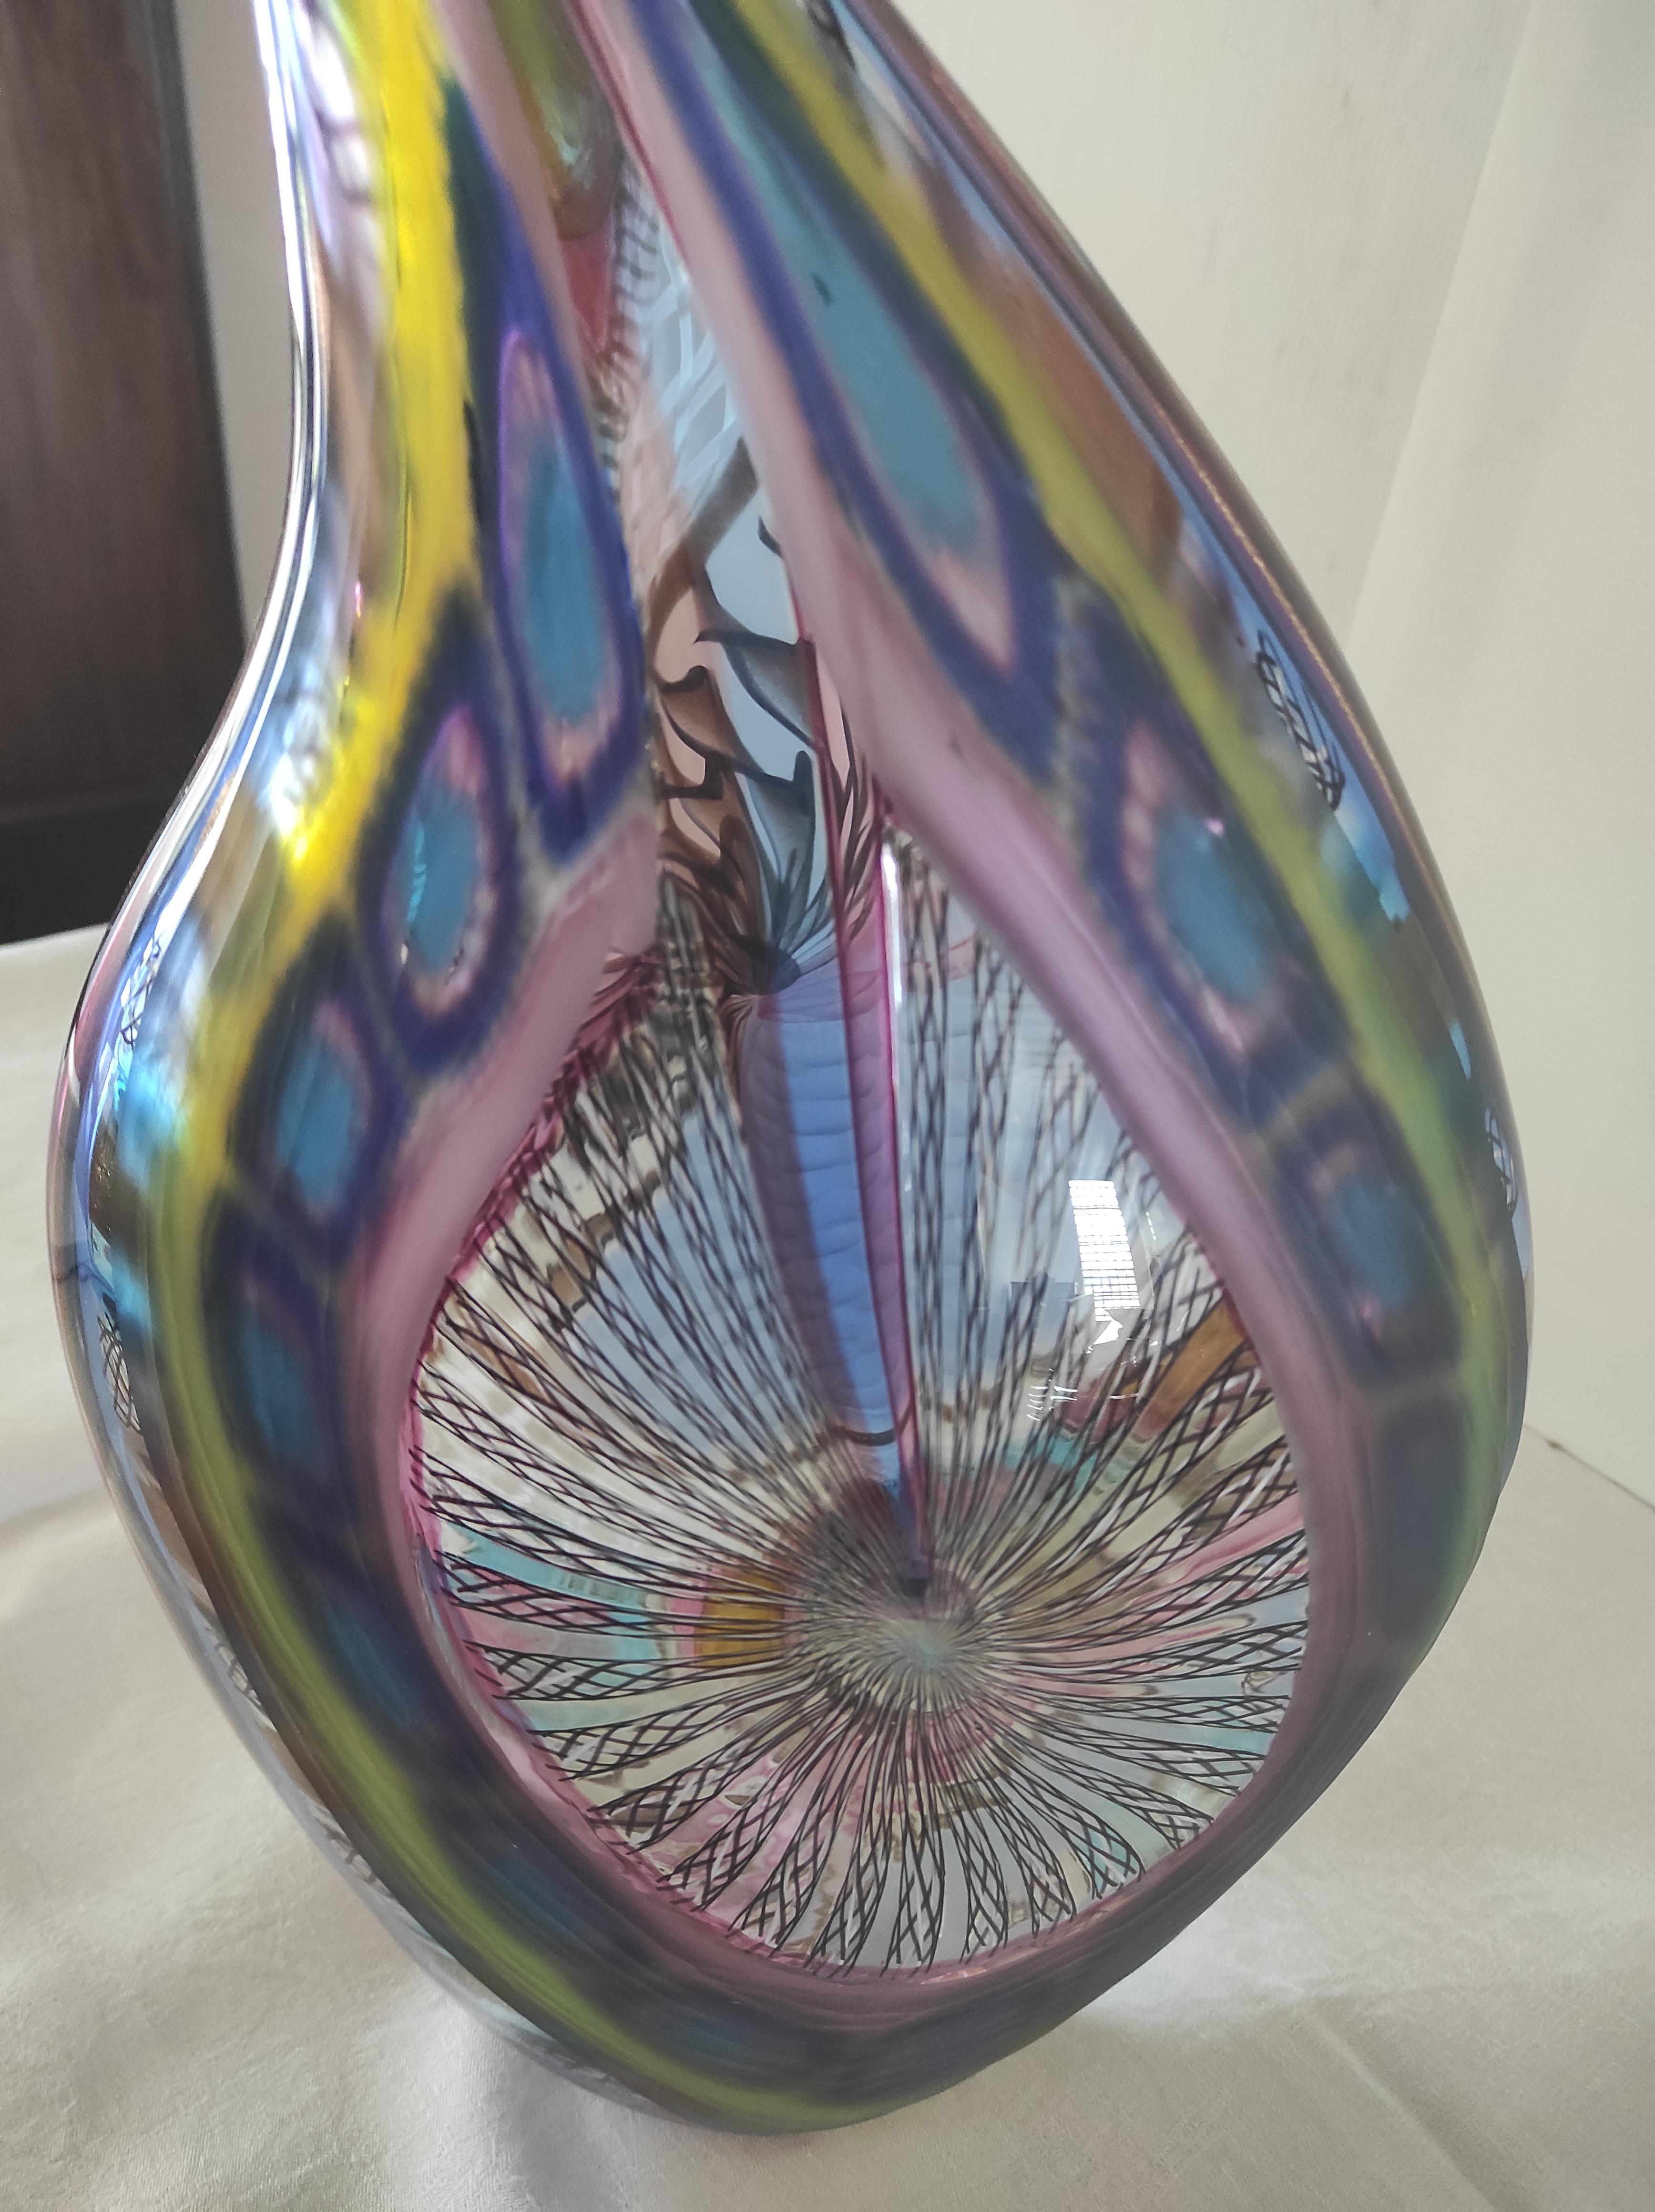 This Murano blown glass vase was created by Vetreria d' Este e Zane of Murano.
Different types of workmanship are present in this vase:
Lattice work: a technique that uses transparent glass rods (glass rods) containing straight or intertwined white